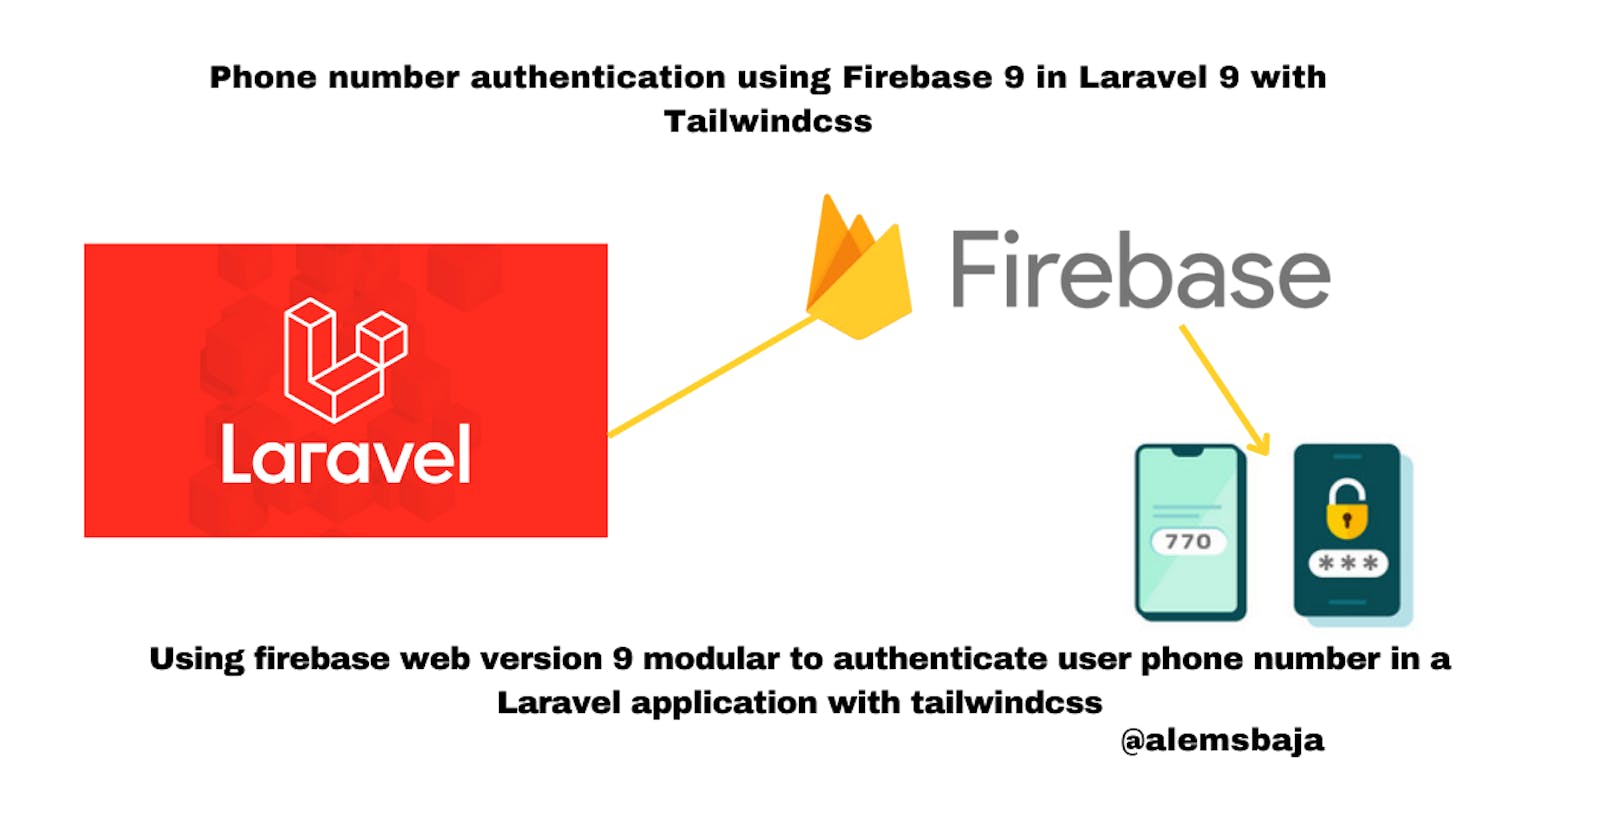 Phone number authentication using Firebase 9 in Laravel 9 with Tailwindcss